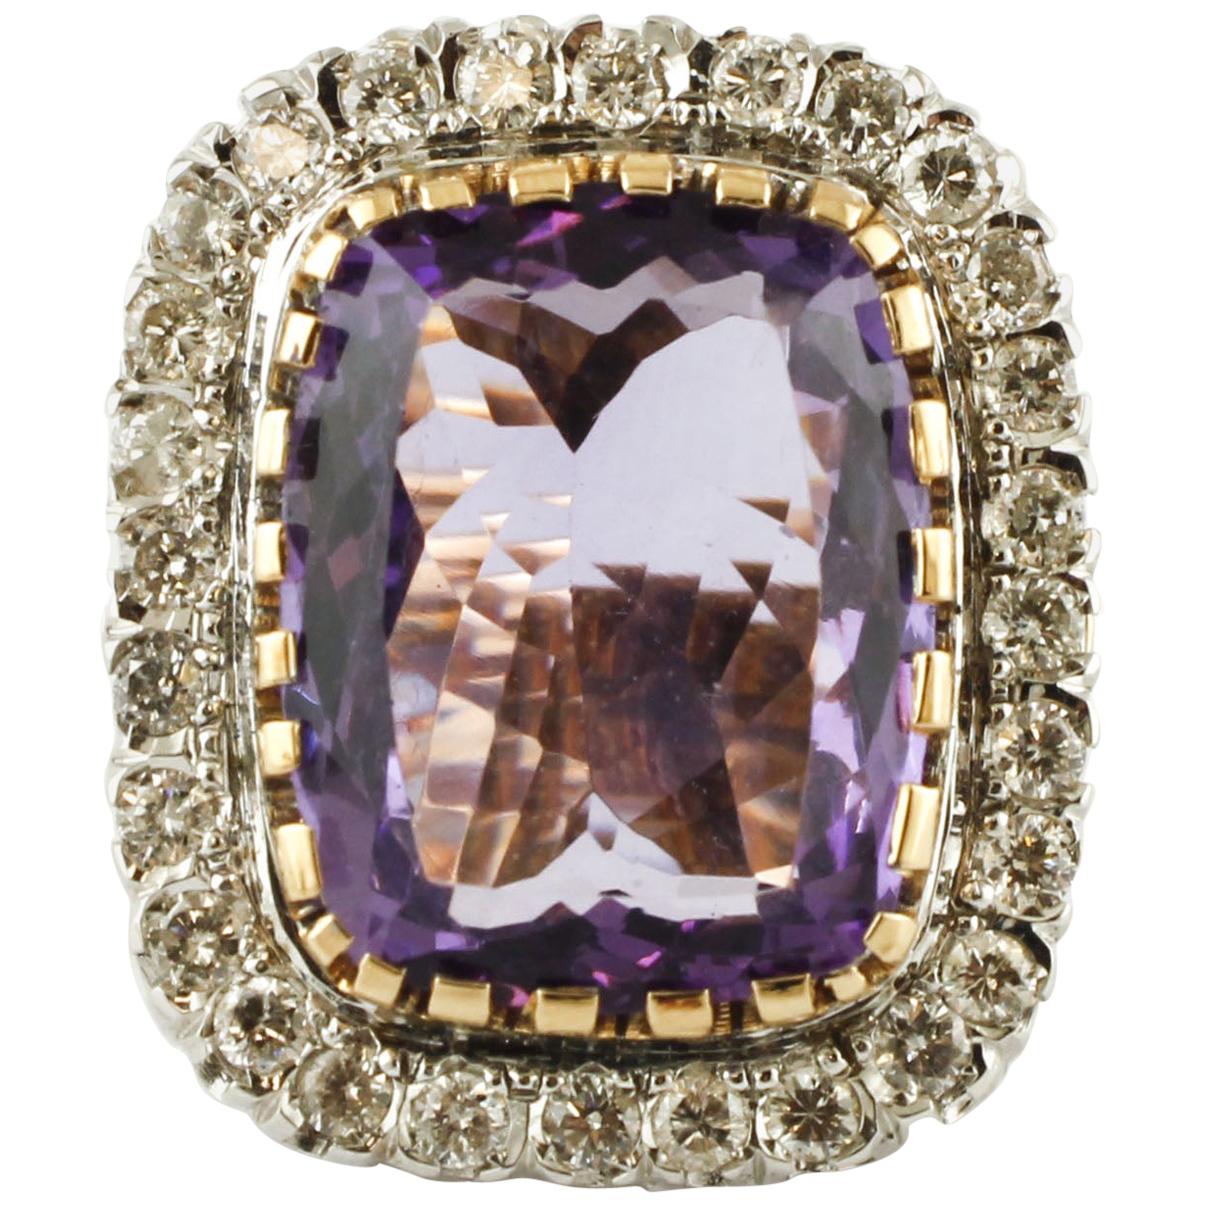 Big Central Amethyst, Diamonds, 14 Karat White and Yellow gold Vintage Ring